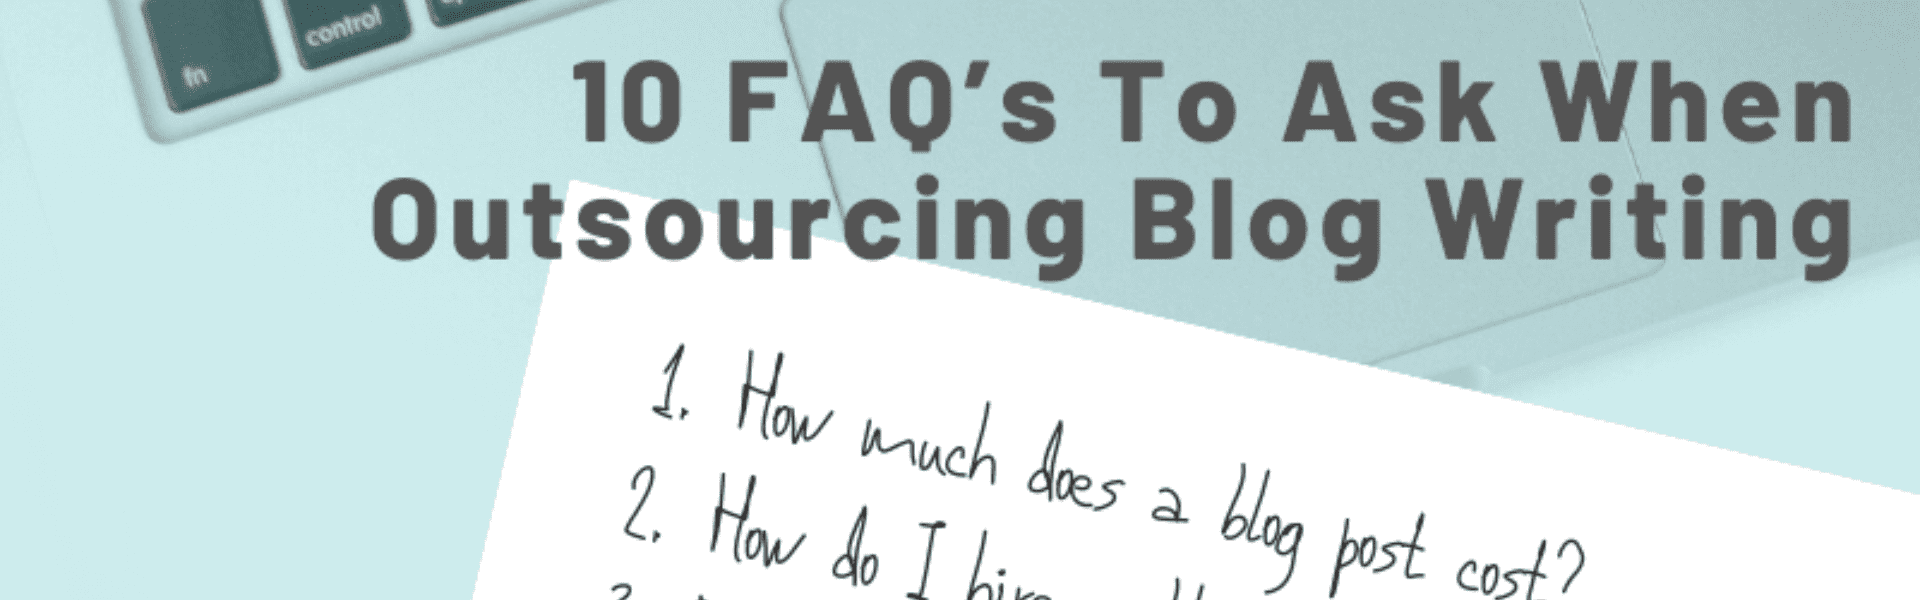 faqs outsourcing